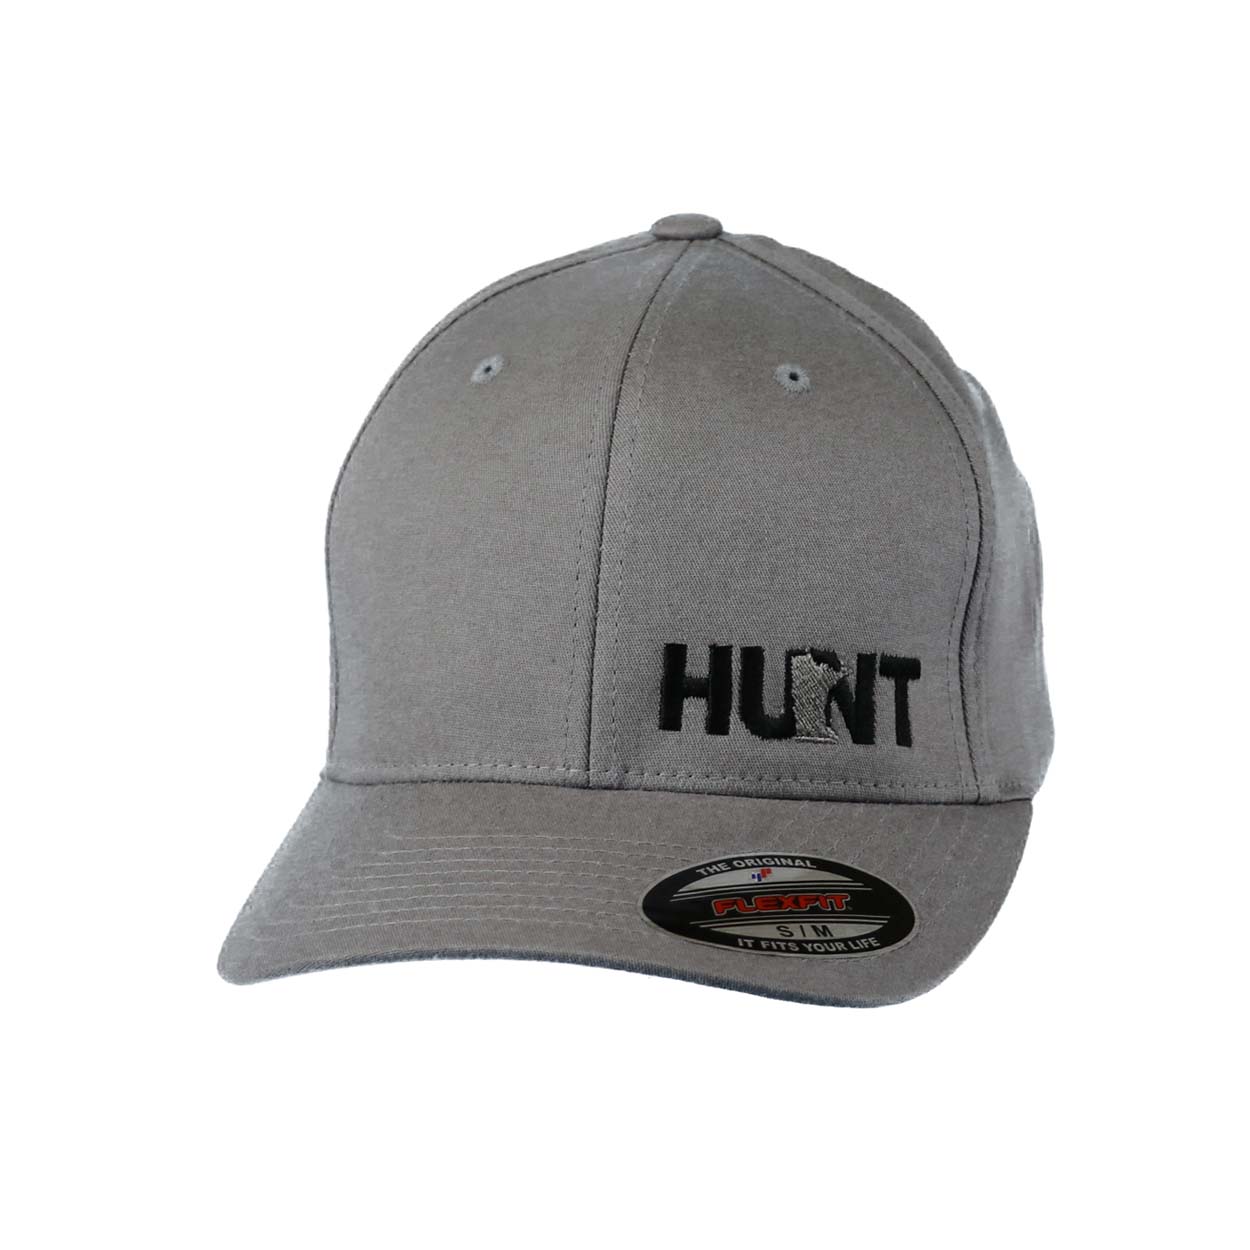 Hunt Minnesota Classic Pro Night Out Embroidered Flex Fit Trucker Hat Gray